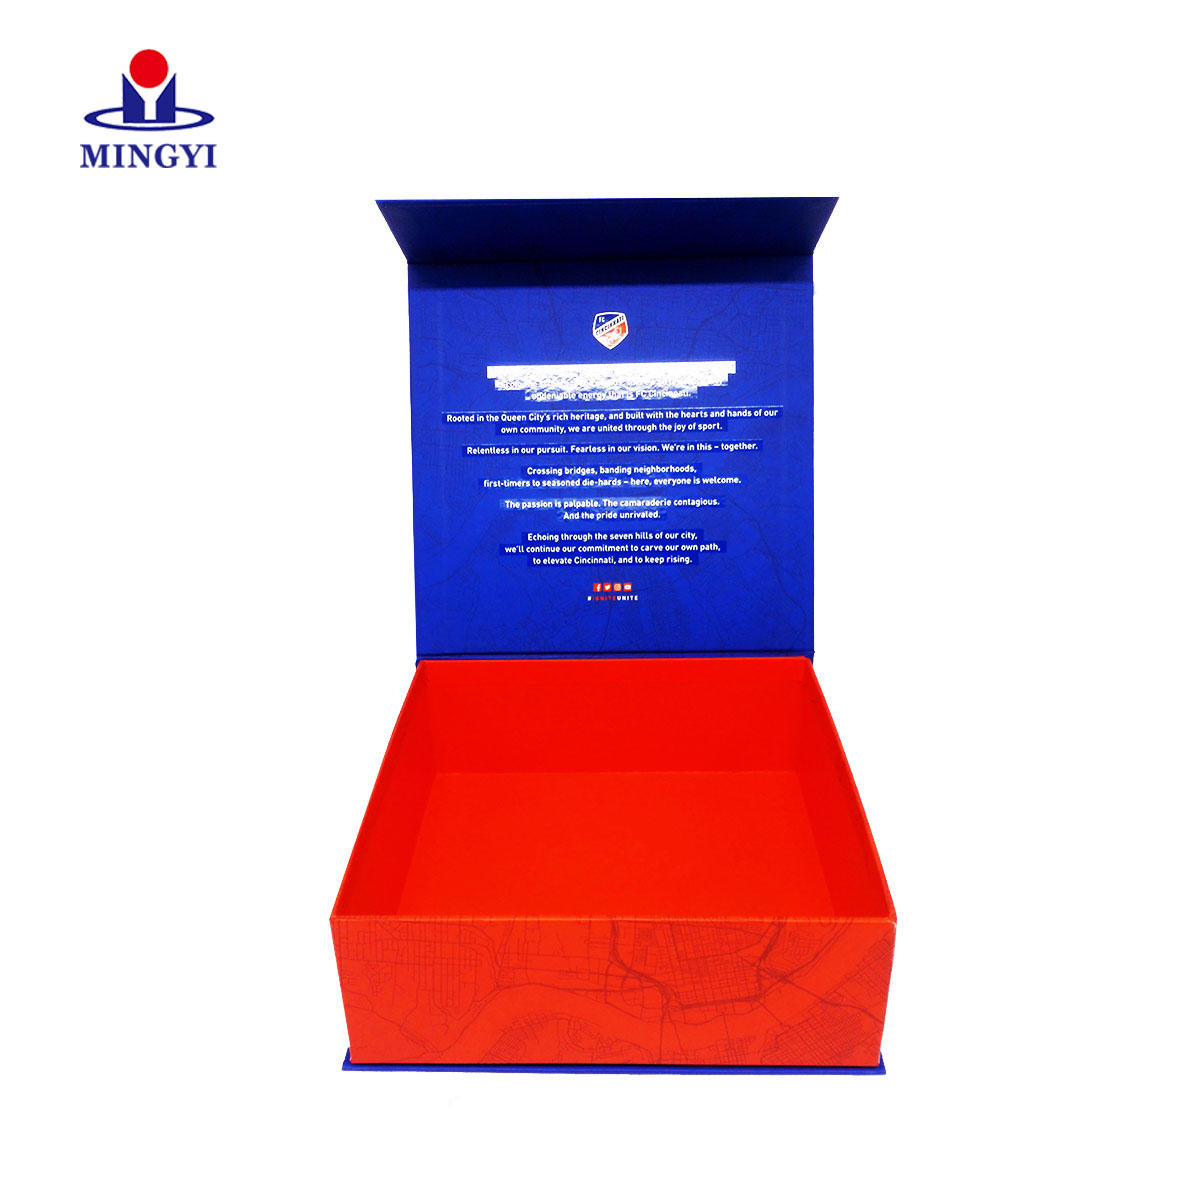 Luxury basketball clamshell souvenir packaging boxes customized logo